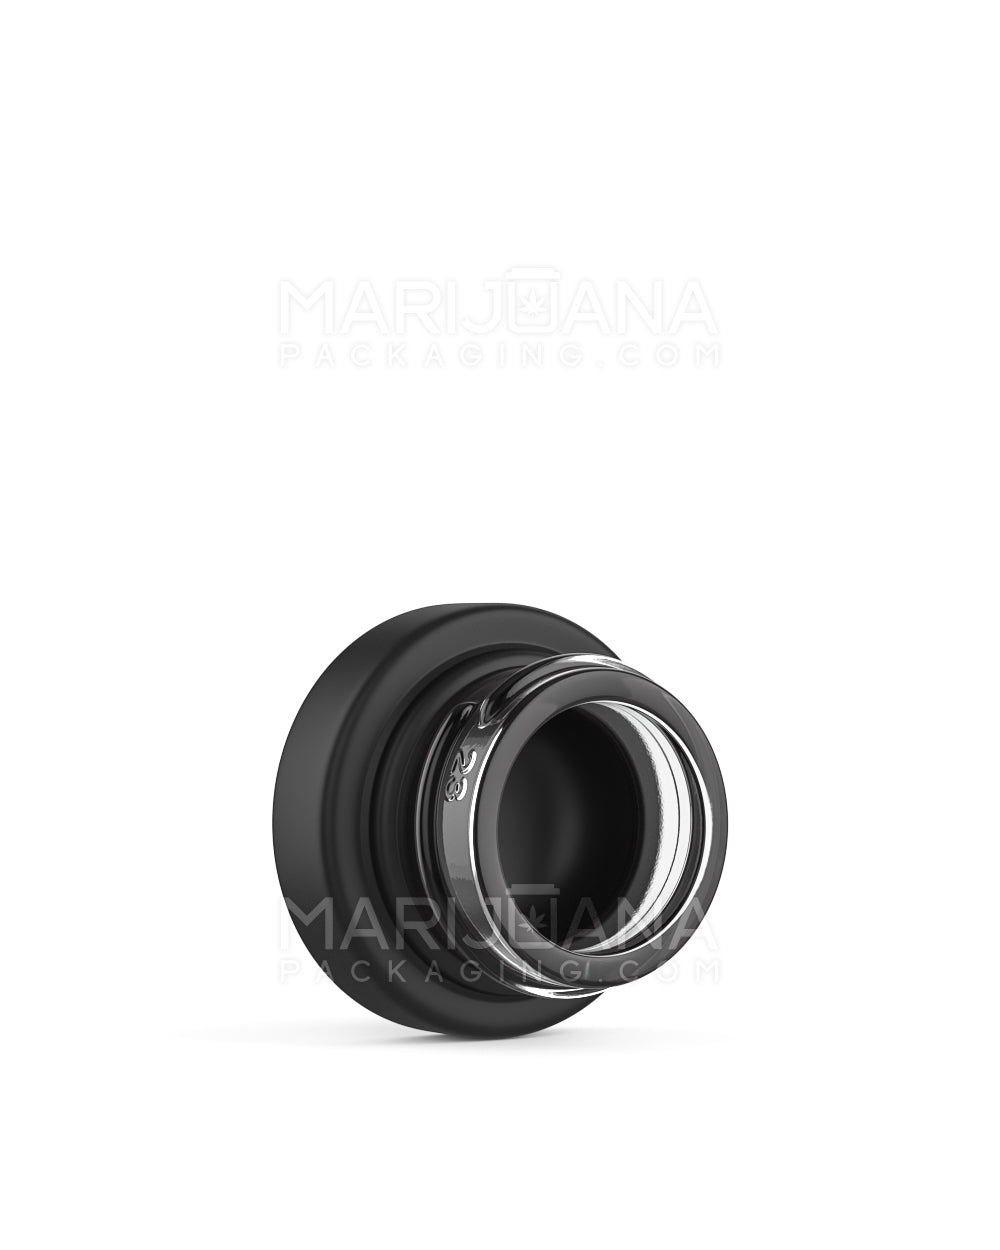 Matte Black Glass Concentrate Containers | 28mm - 5mL - 504 Count - 3